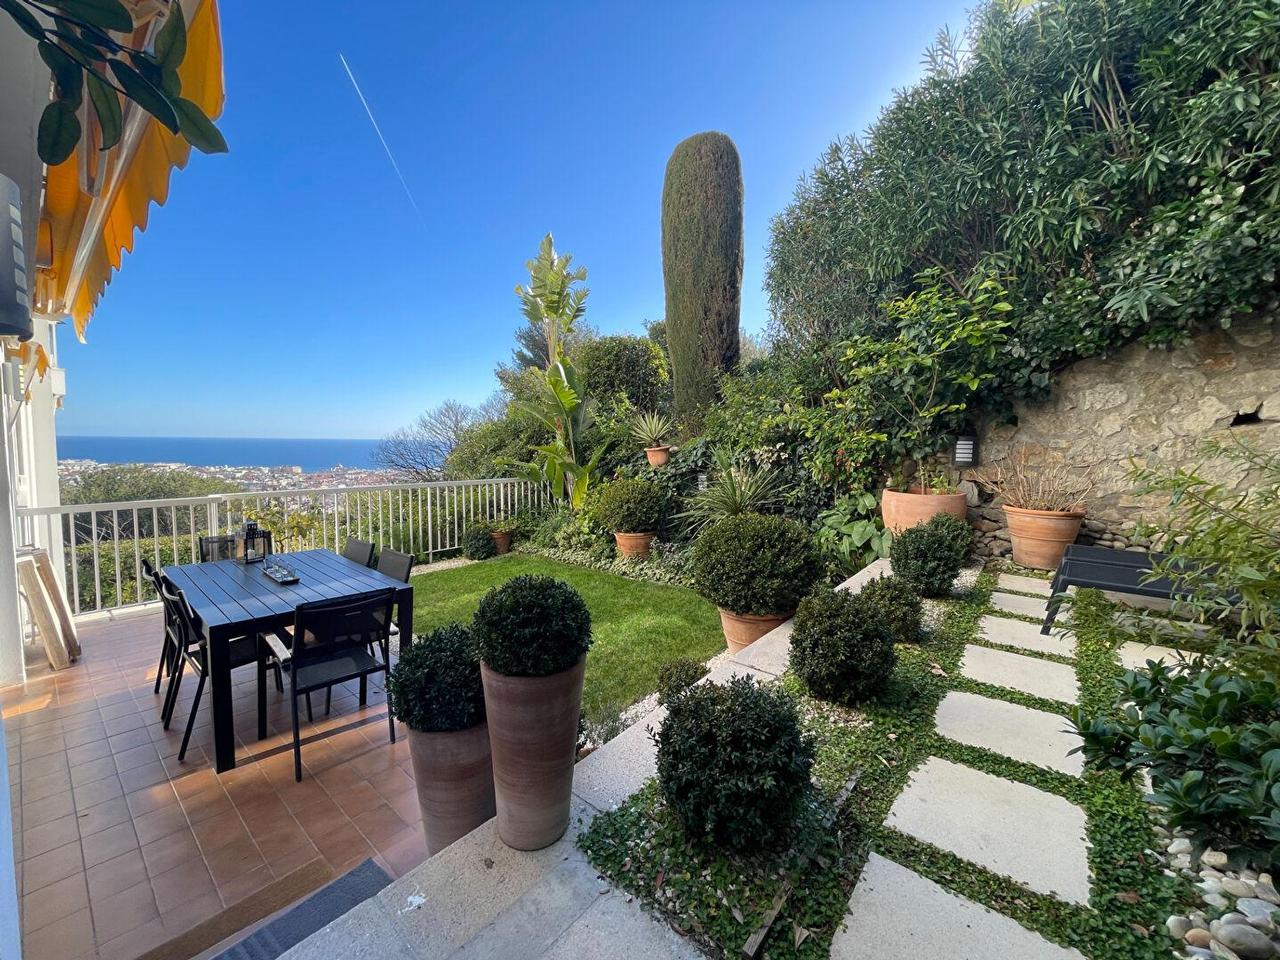 Nice Riviera - Real estate agency Nice Côte d'Azur | Appartement  2 Rooms 45.74m2  for sale   399 500 €